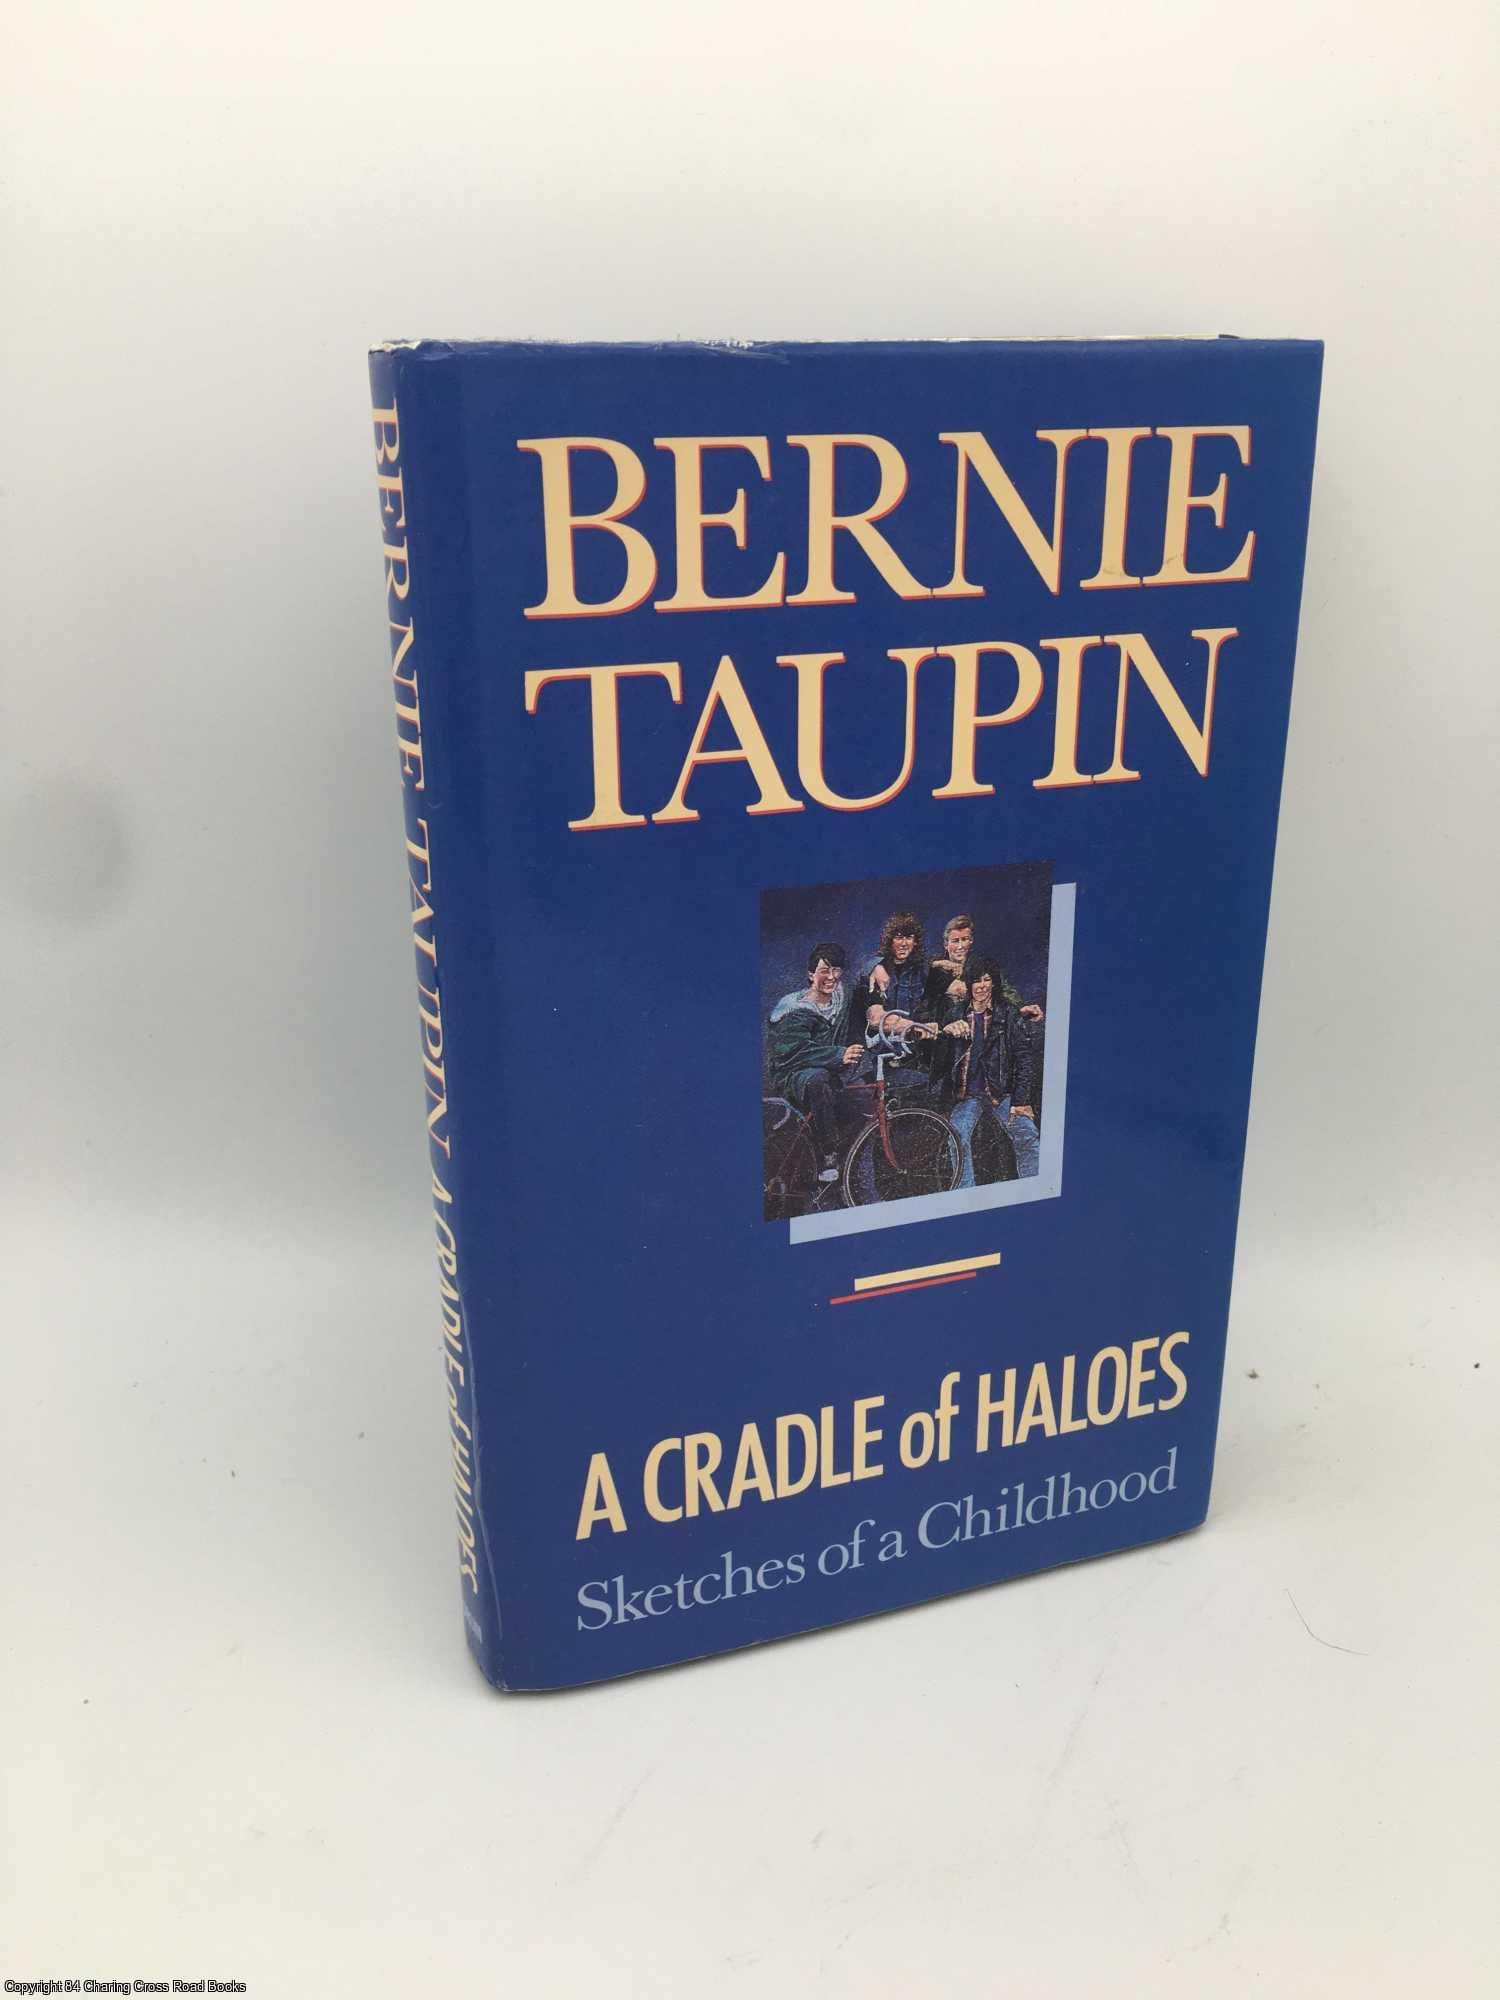 Taupin, Bernie - A Cradle of Haloes